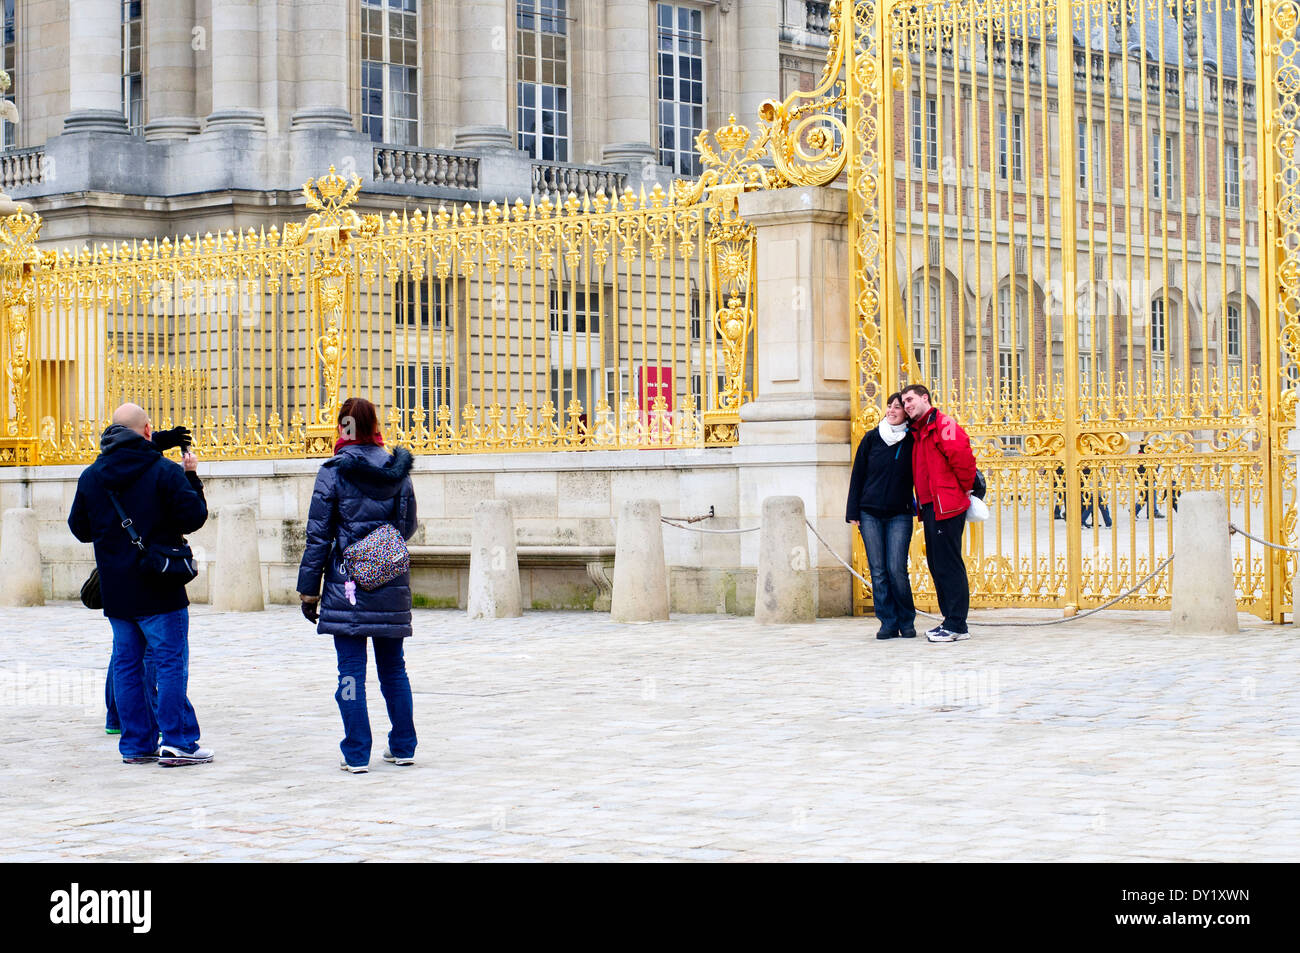 Tourists Taking Pictures at the Palace of Versailles Entrance, Paris Stock Photo